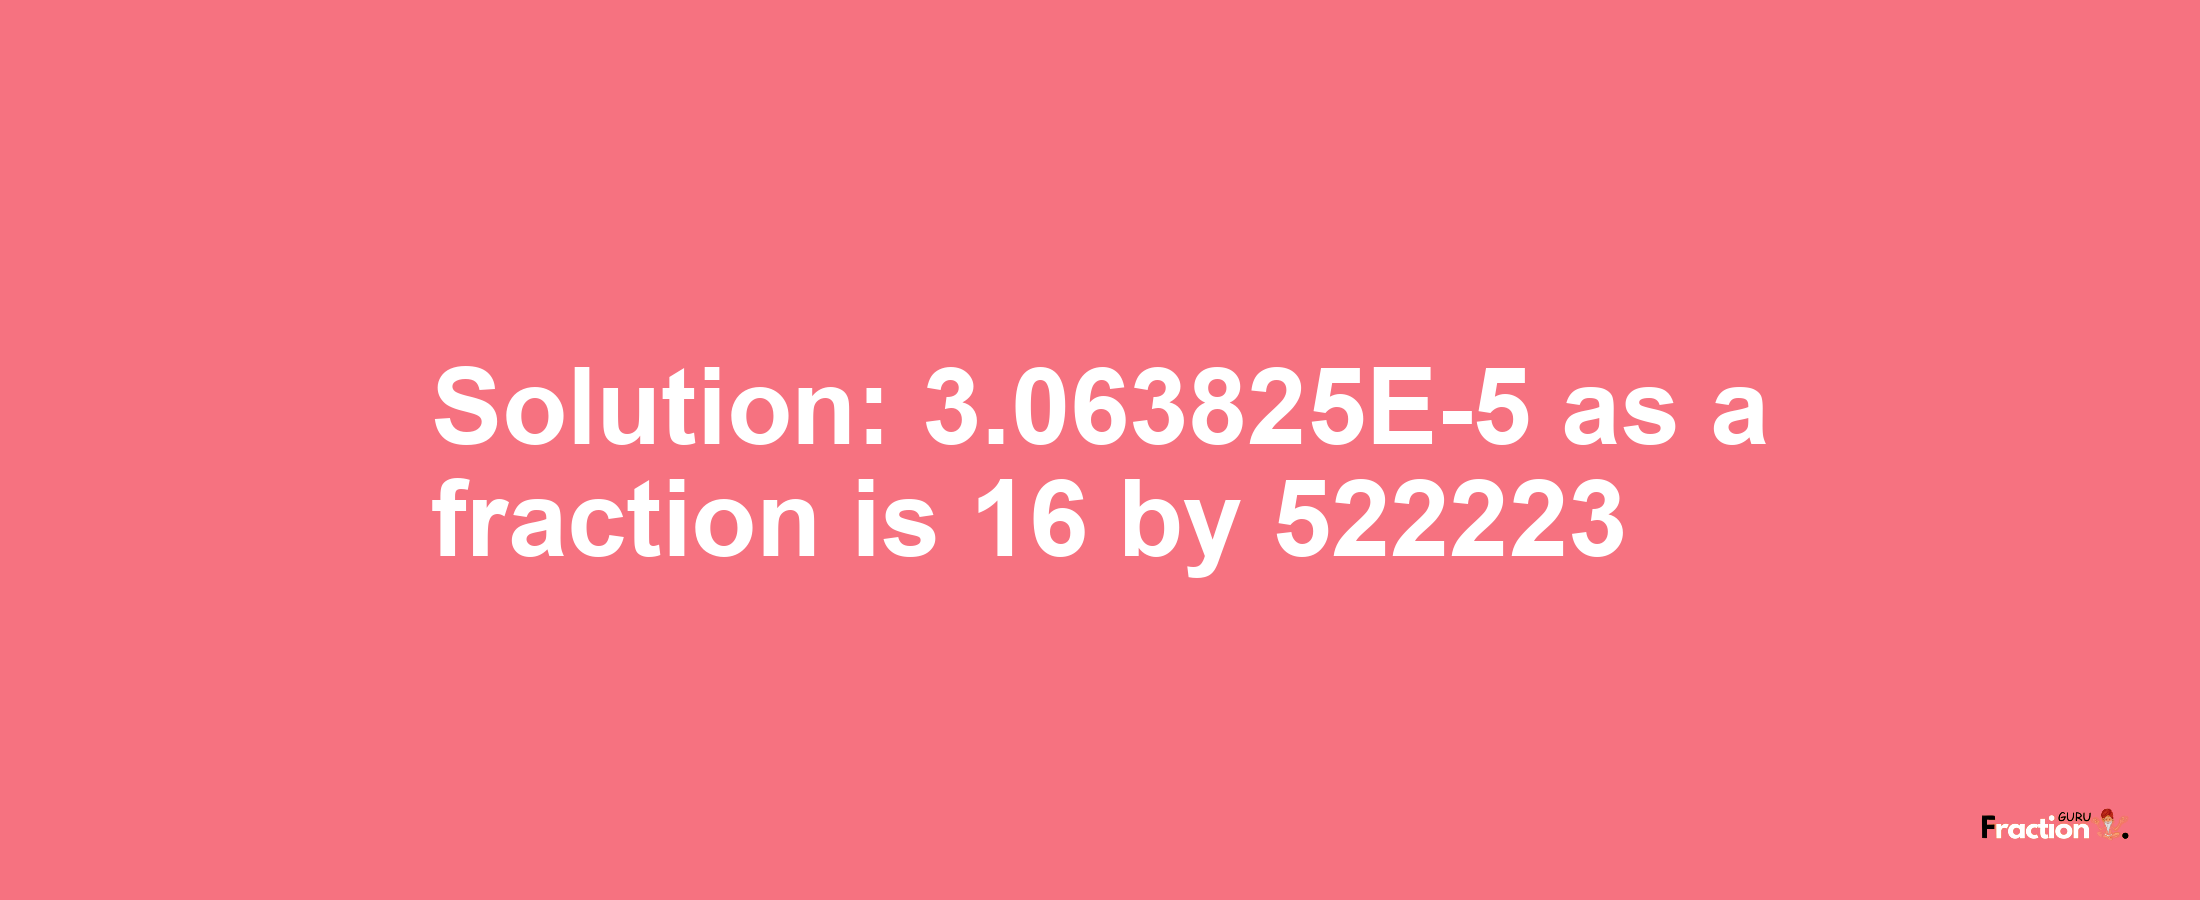 Solution:3.063825E-5 as a fraction is 16/522223